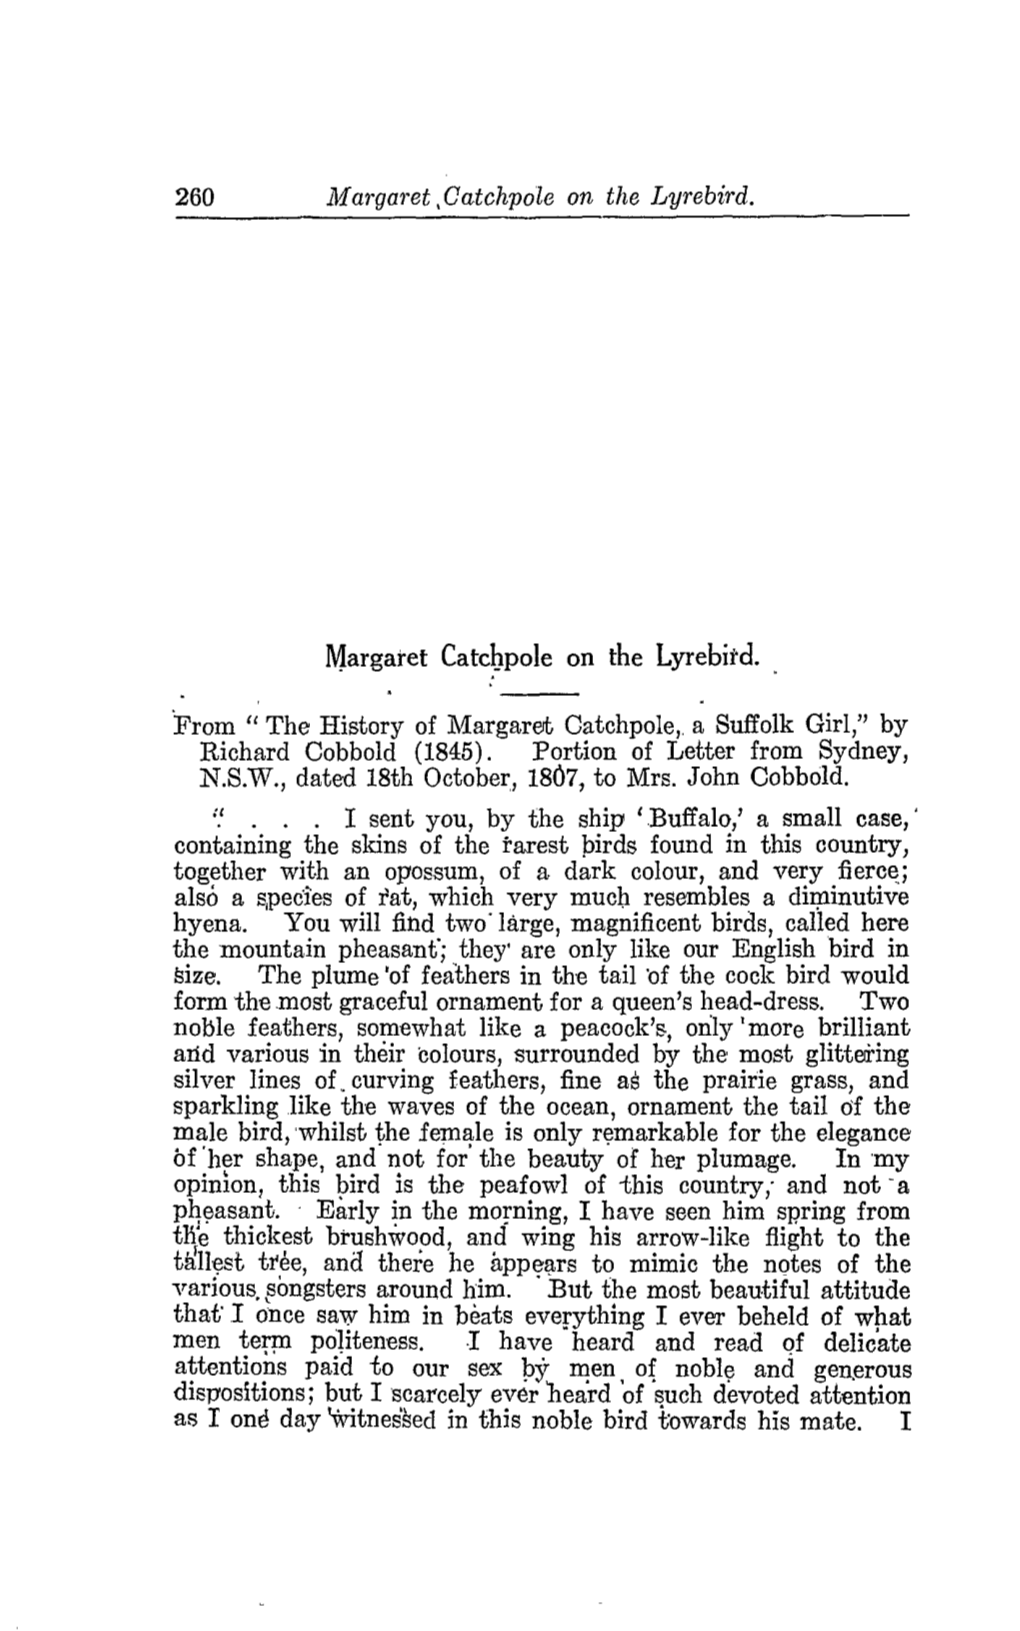 The History of Margaret Catchpole, a Suffolk Girl,'' by Richard Cobbold (1845)